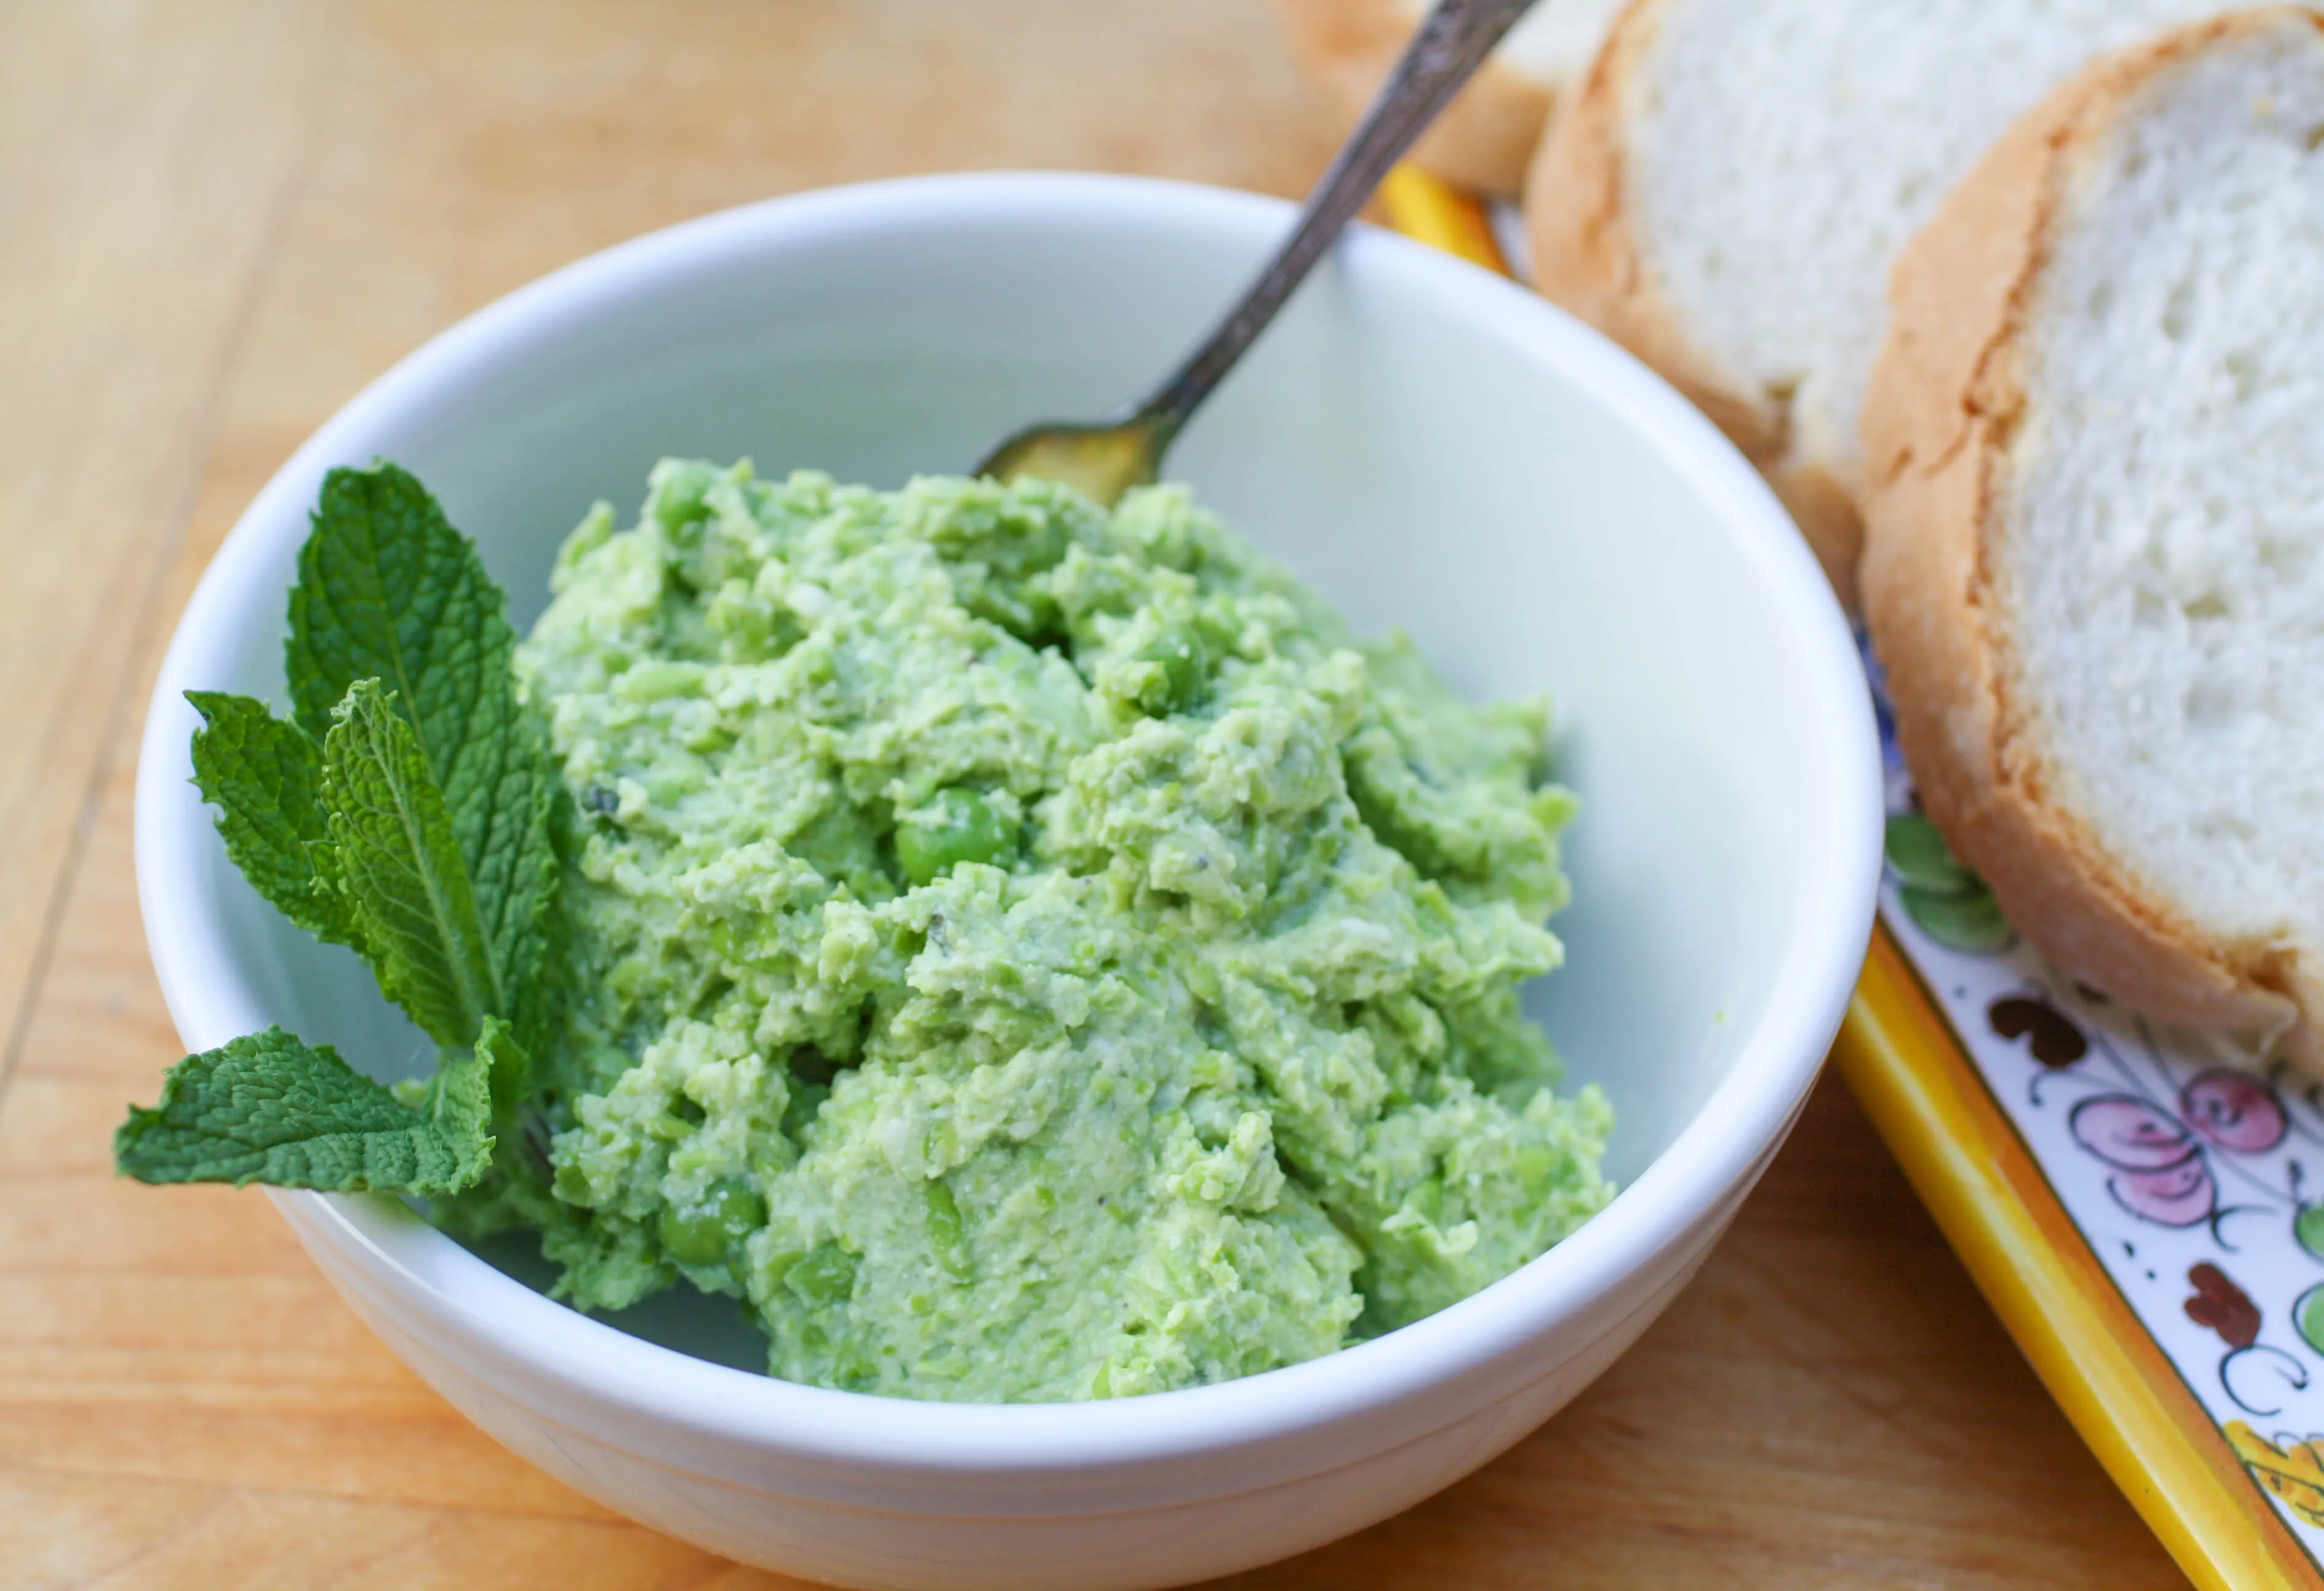 Pea and Ricotta Spread is a fresh and fun appetizer to serve this season. Pea and Ricotta Spread is a tasty appetizer to serve soon!